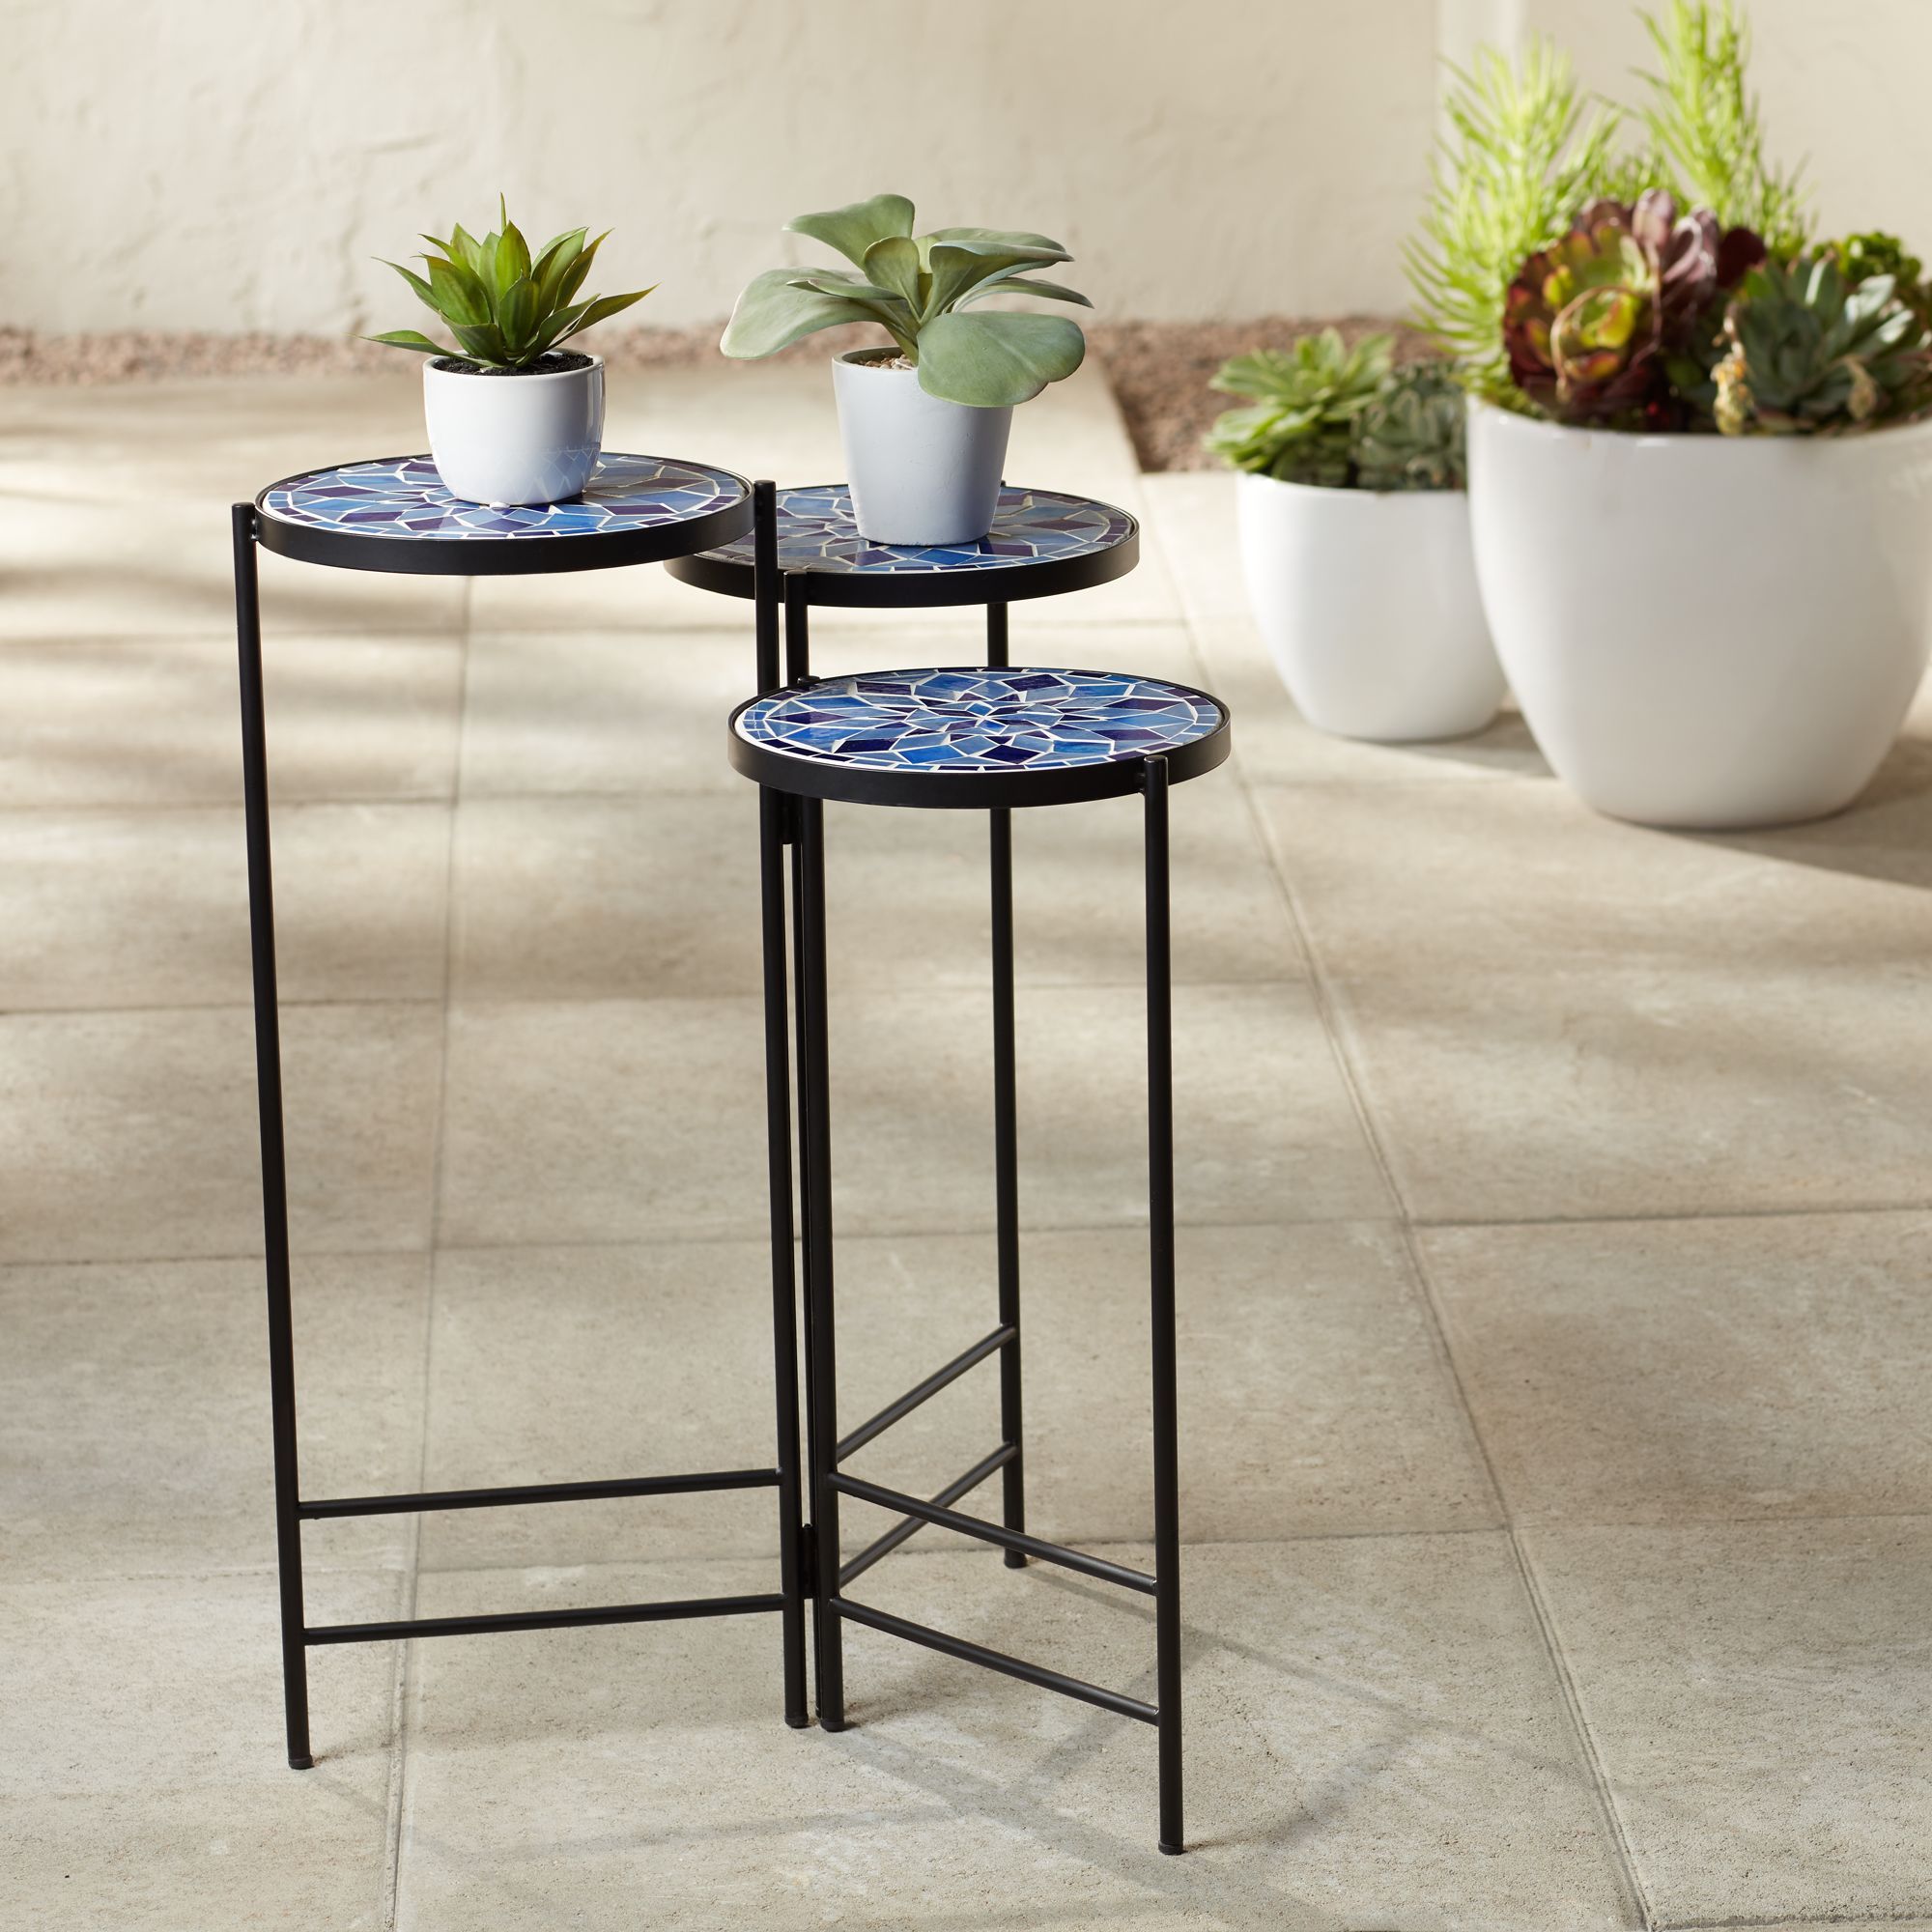 Teal Island Designs Blue Mosaic Black Iron Set Of 3 Accent Tables Within Mosaic Black Outdoor Accent Tables (View 11 of 15)